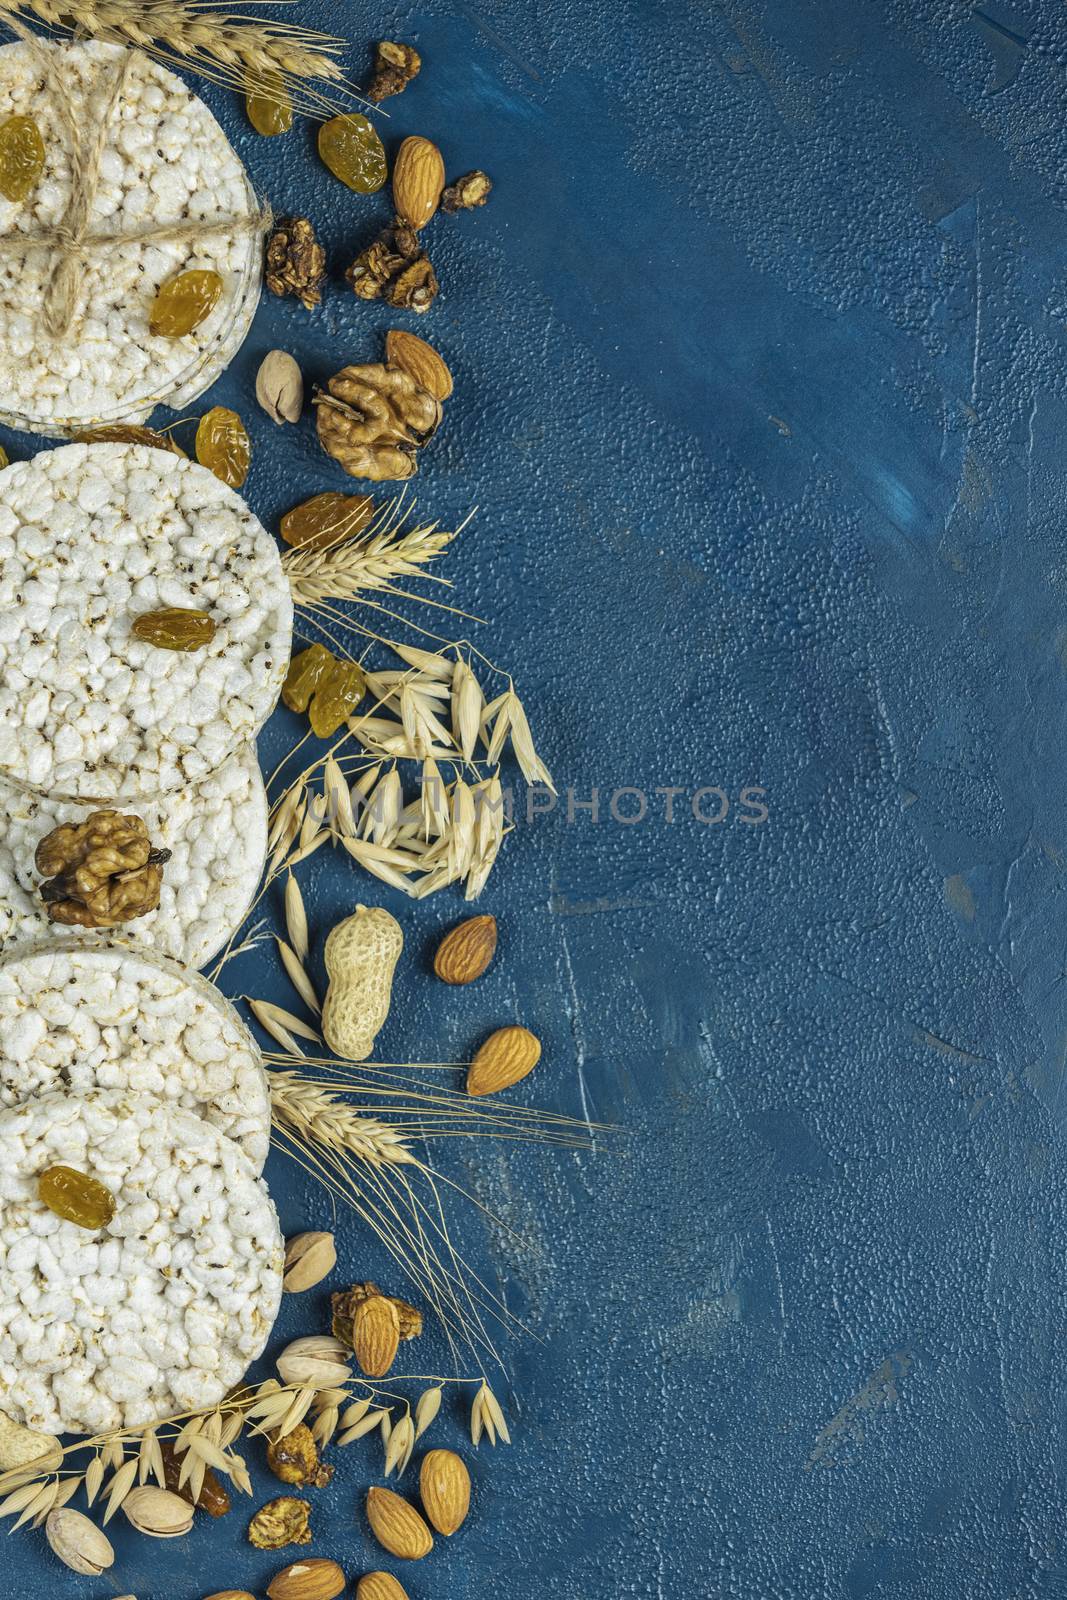 American puffed rice cakes. Healthy snacks with ears of wheat on classic blue concrete surface, top view, flat lay, copy space for you text.